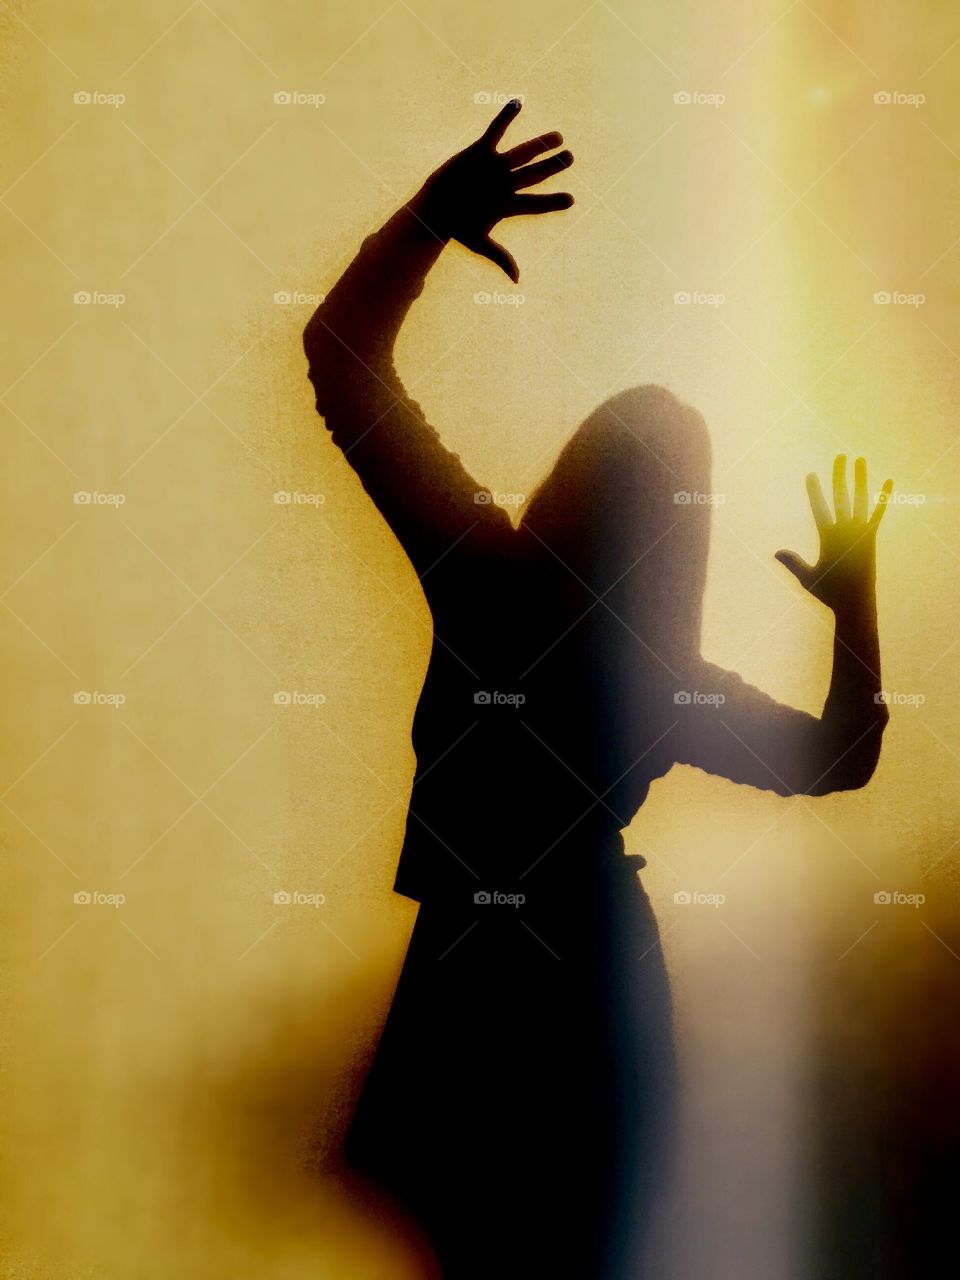 Young woman silhouette against a vibrant yellow background 